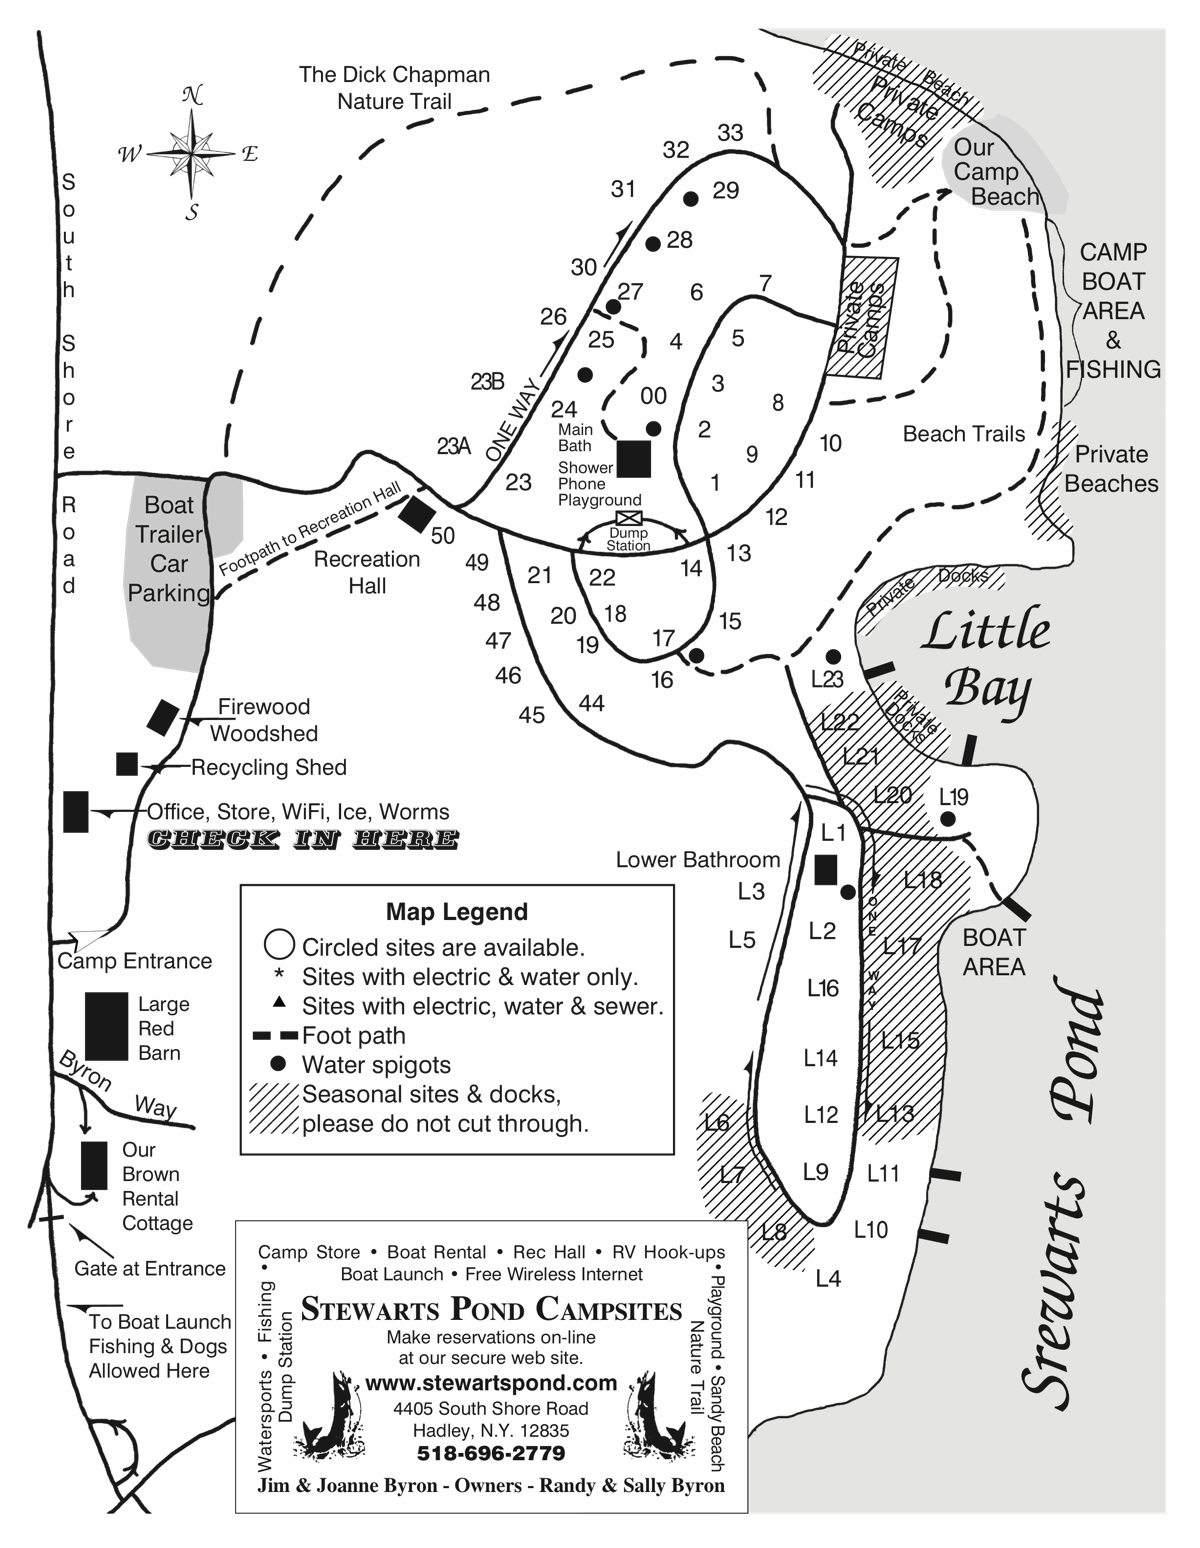 Map of the campground with site numbers, trails and bathroom locations